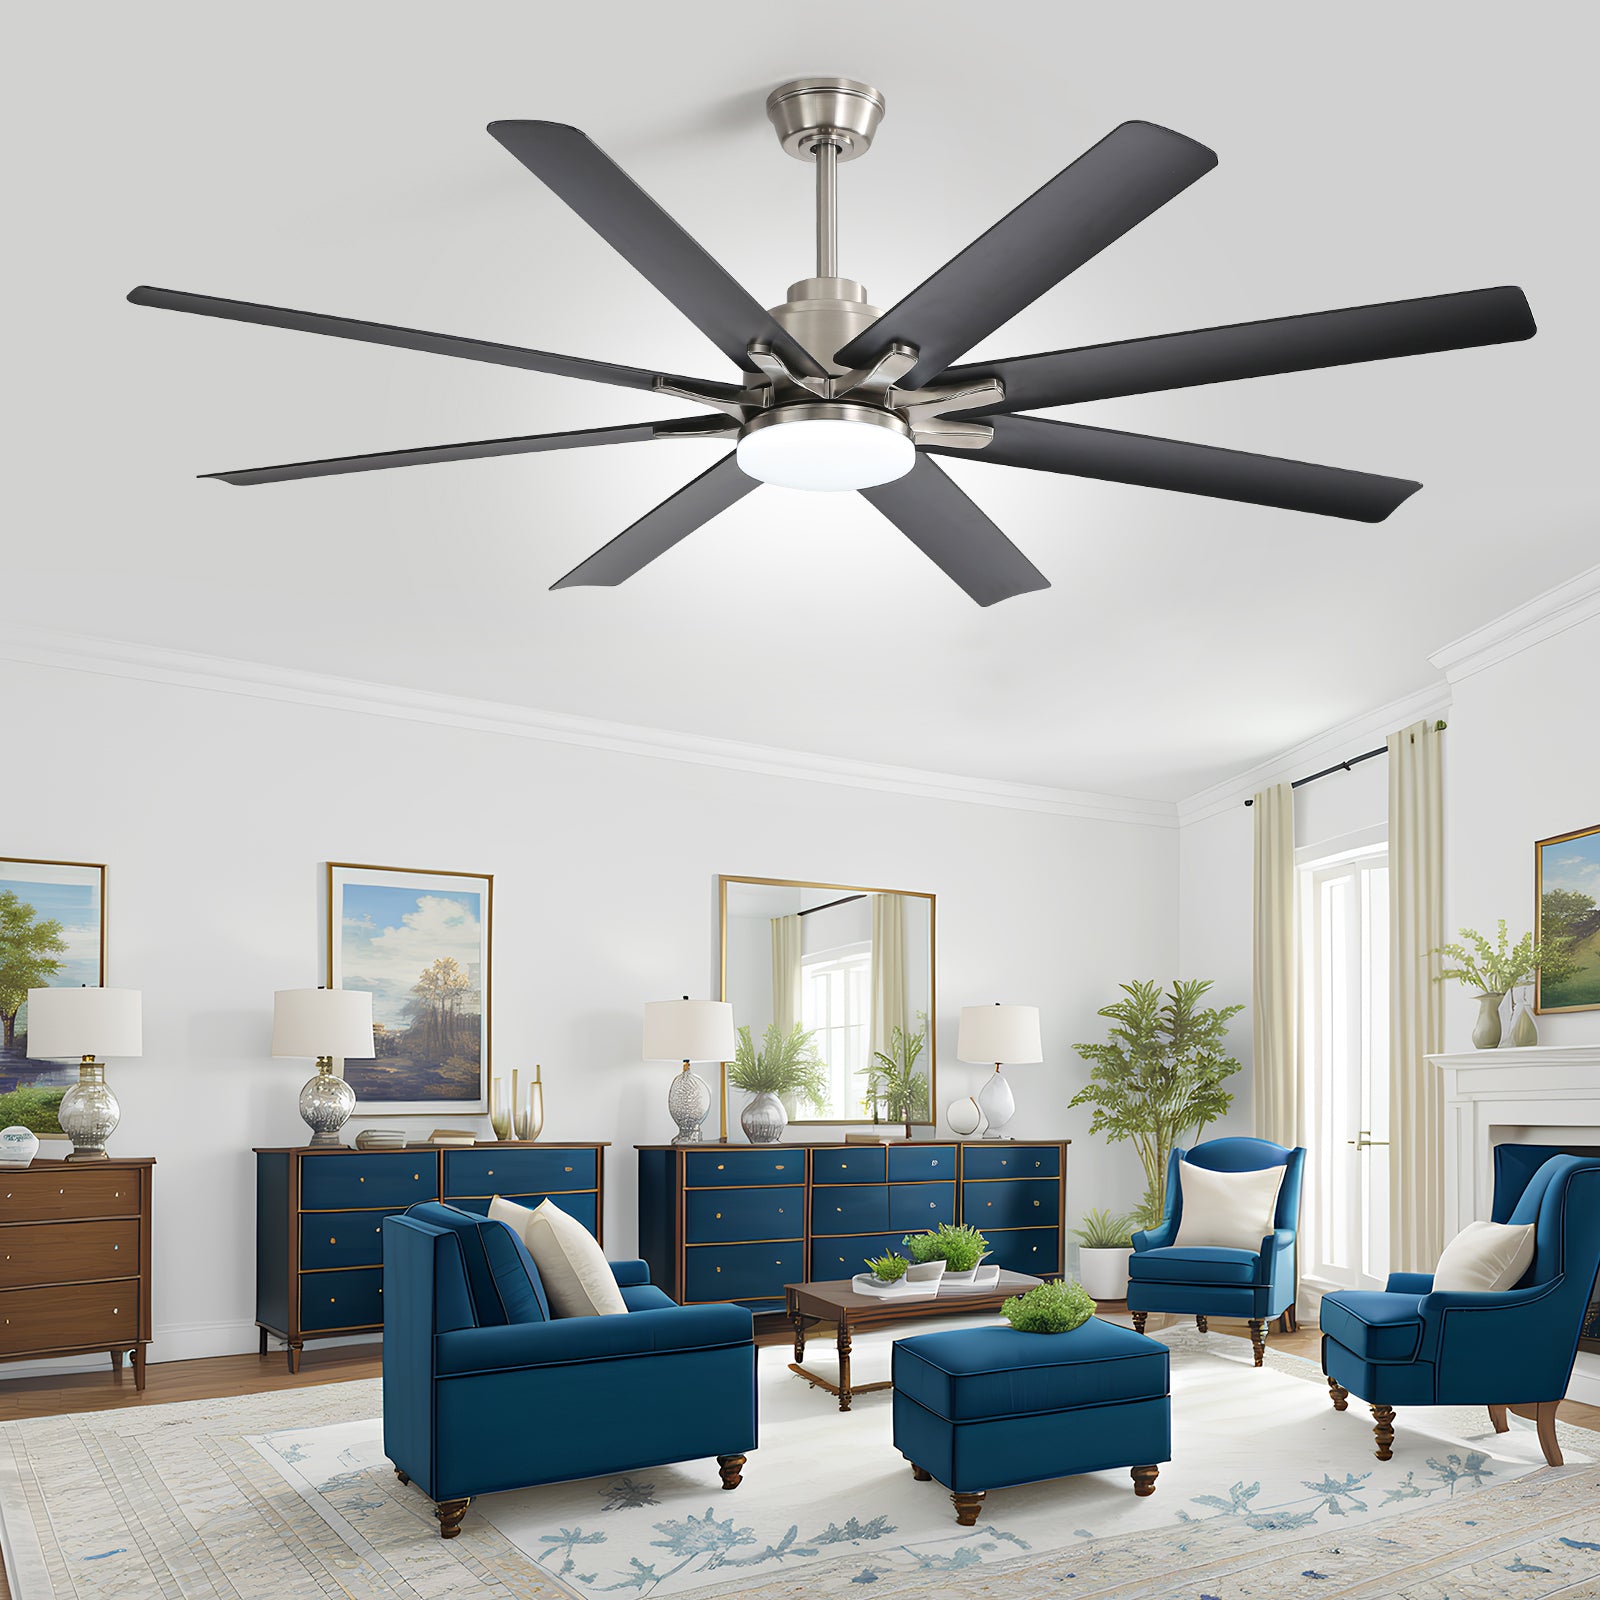 66 Inch Low Profile ABS Ceiling Fan with Dimmable brushed nickel-abs